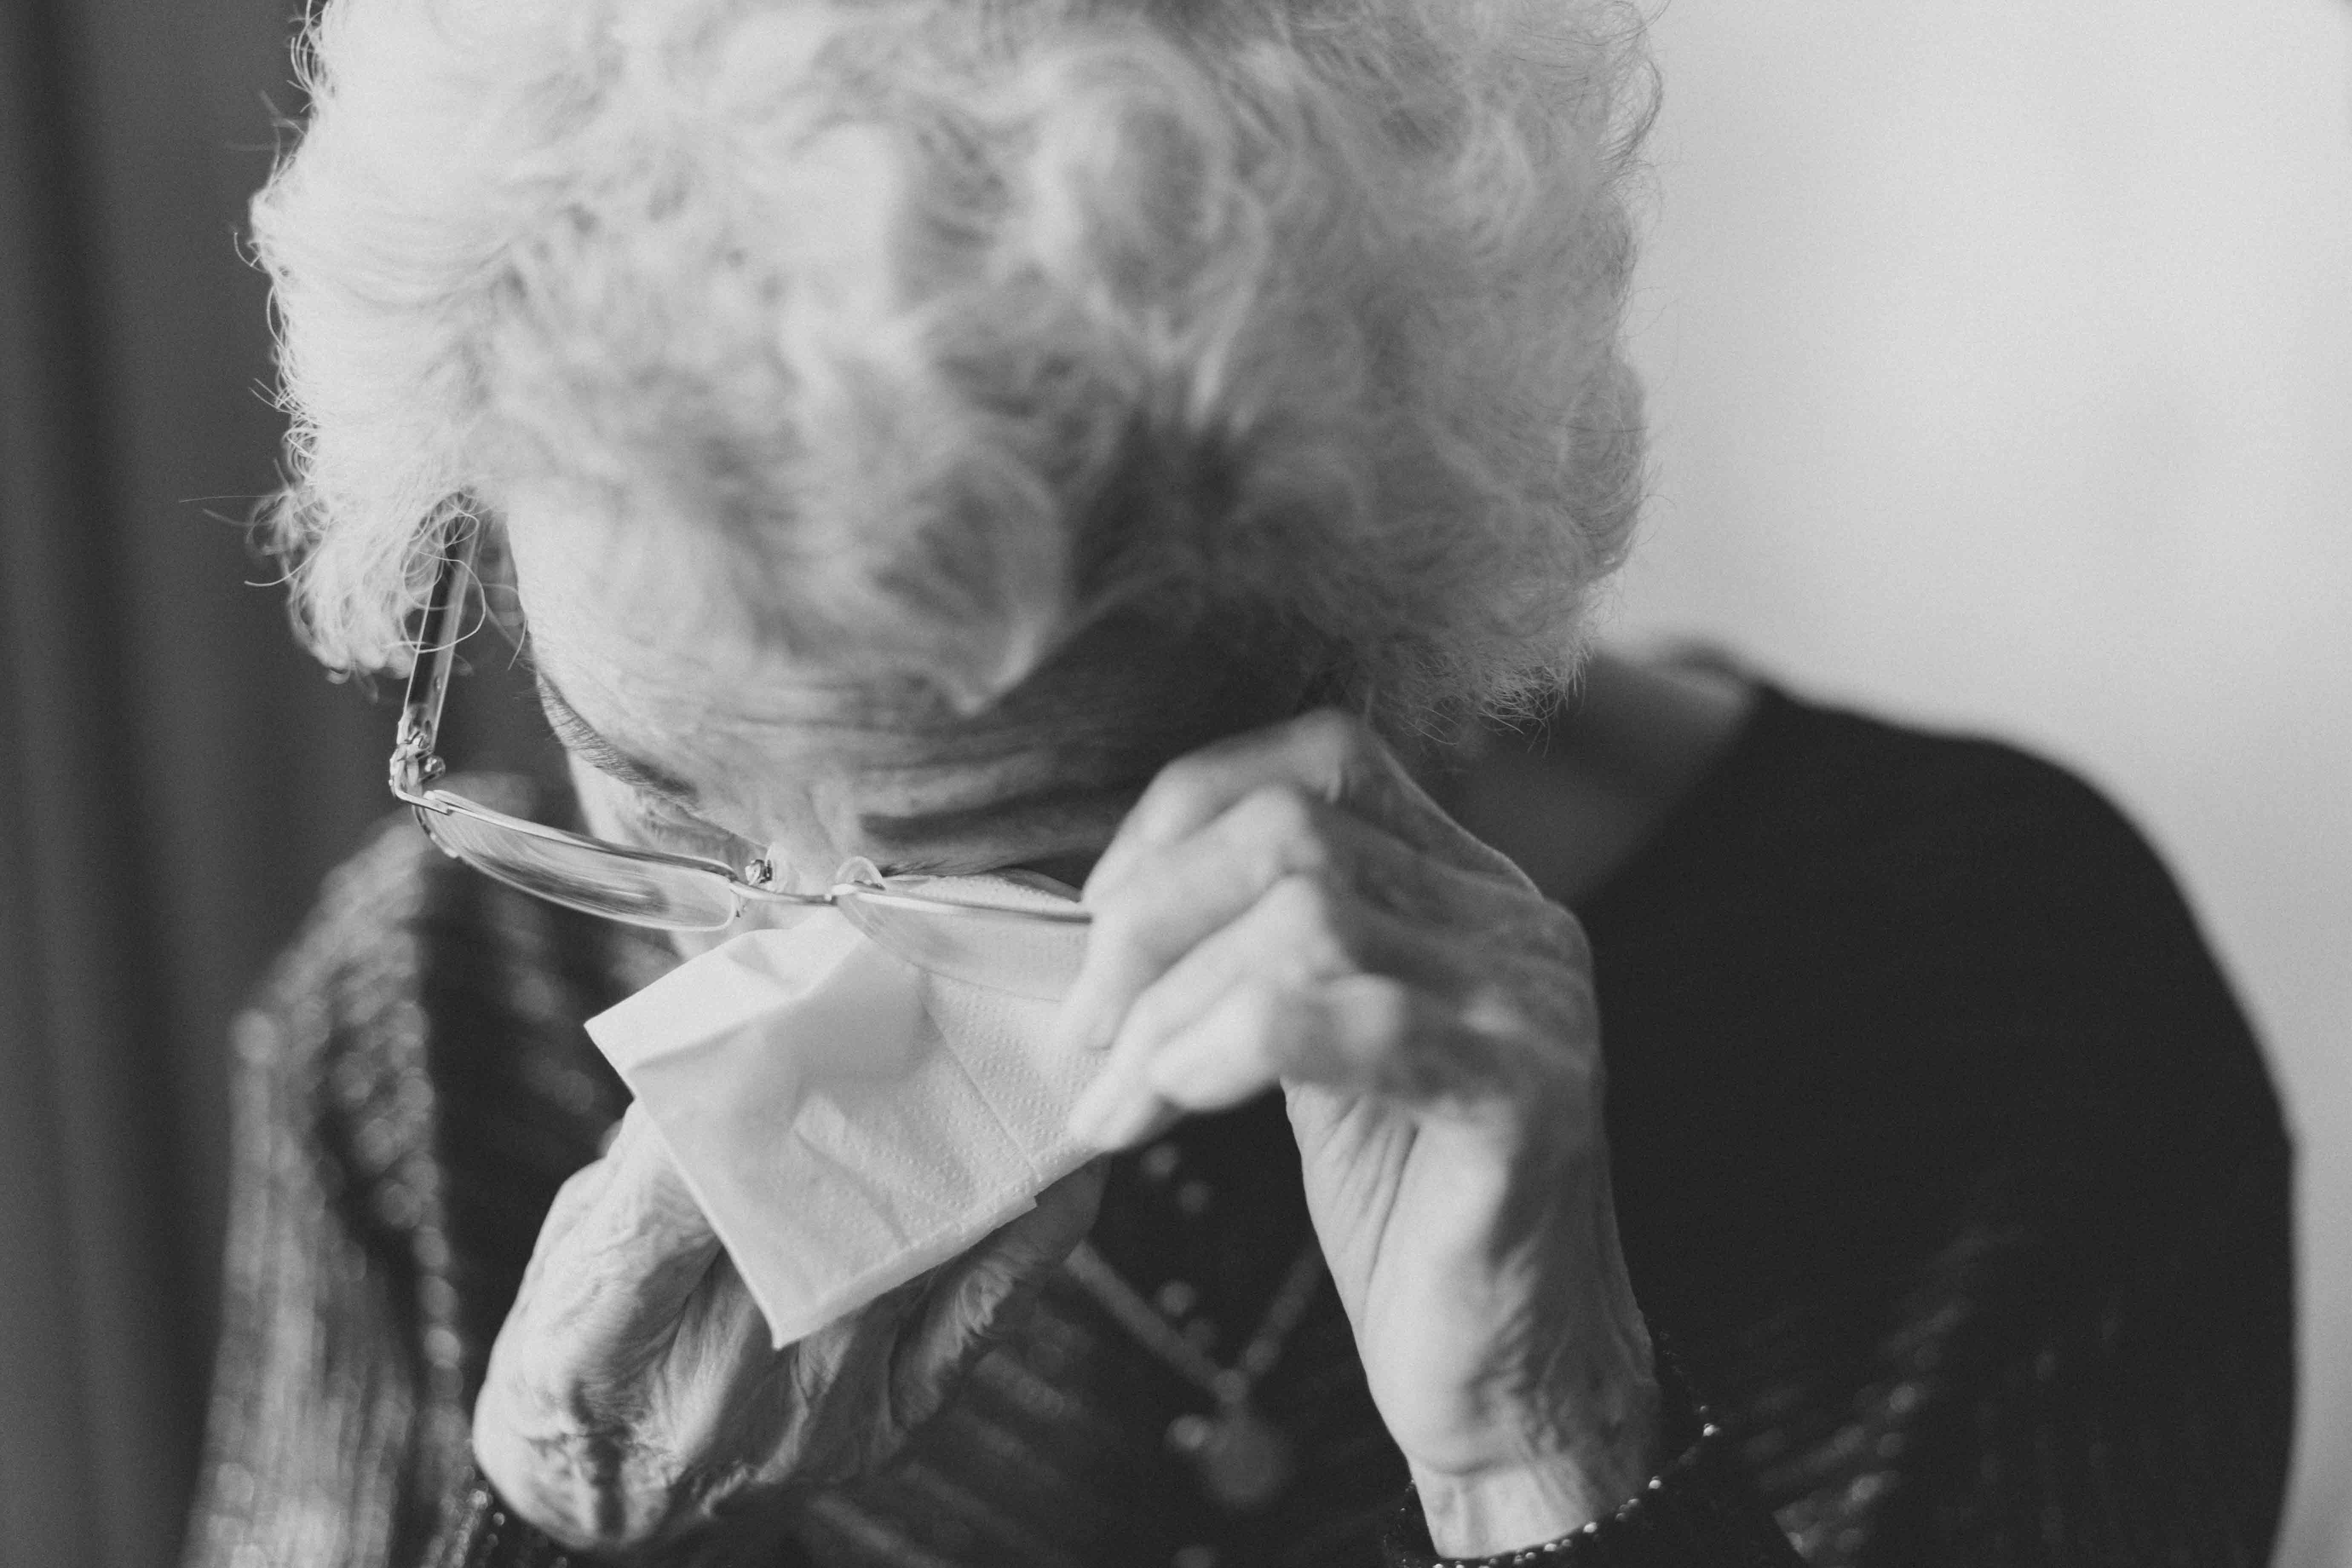 Paul's grandma lived alone with the memories of her late son. | Source: Unsplash